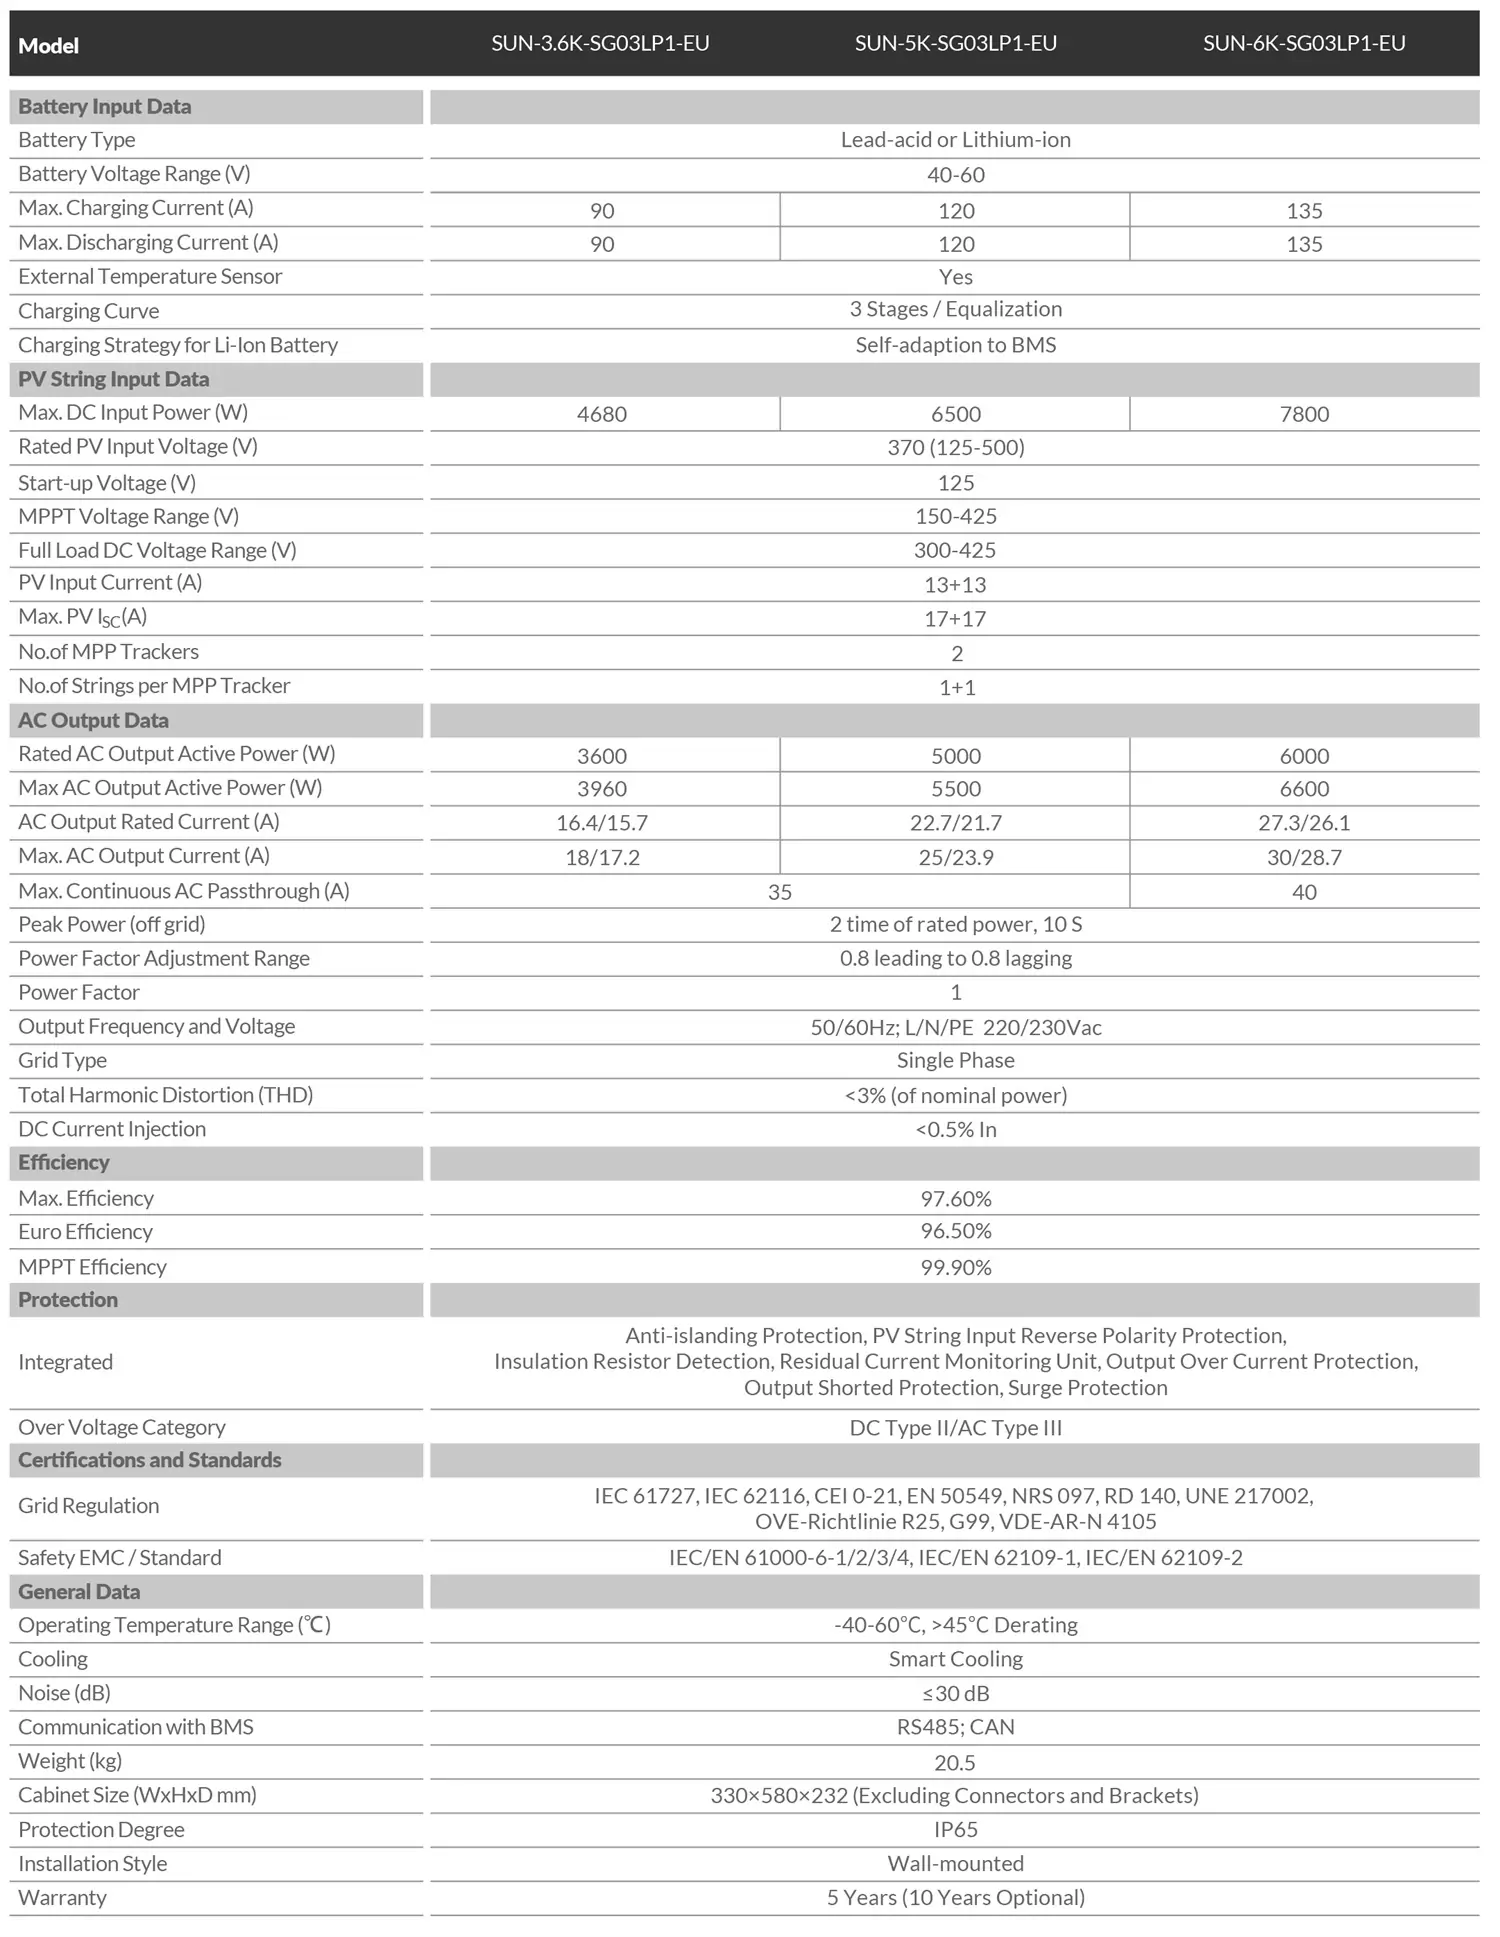 techinical specifications